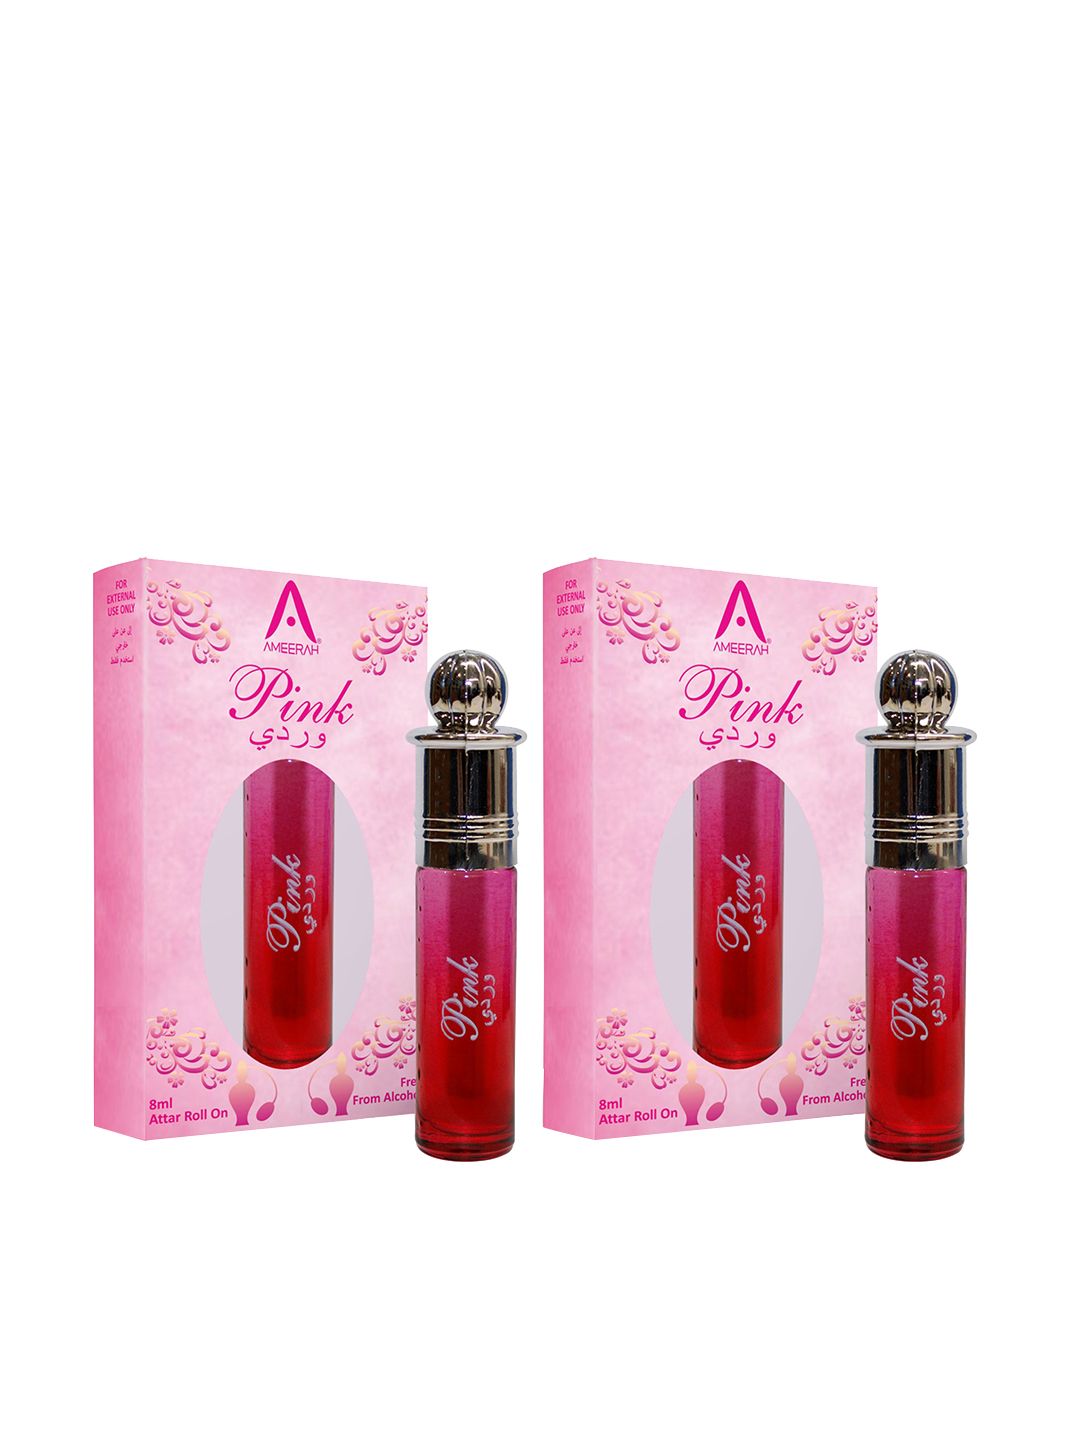 St. John Set of 2 Ameerah Pink Floral Attar Roll On - 8 ml Each Price in India